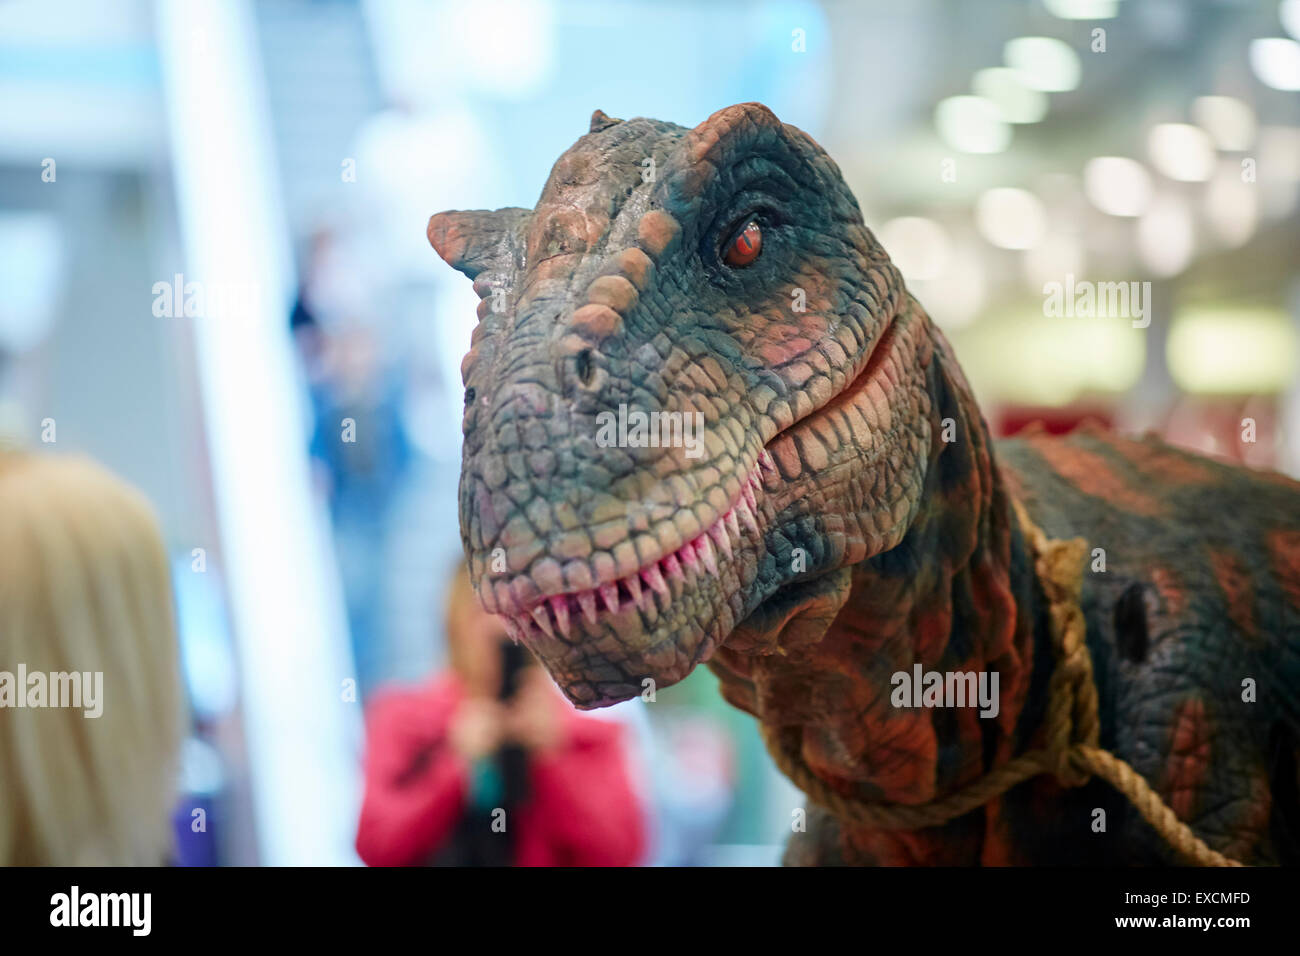 LOWRY OUTLAT MALL AT MEDIACITY Salford Quays  dinosaur visitor brings some Jurassic fun to the weekends markets   Shop shopping Stock Photo